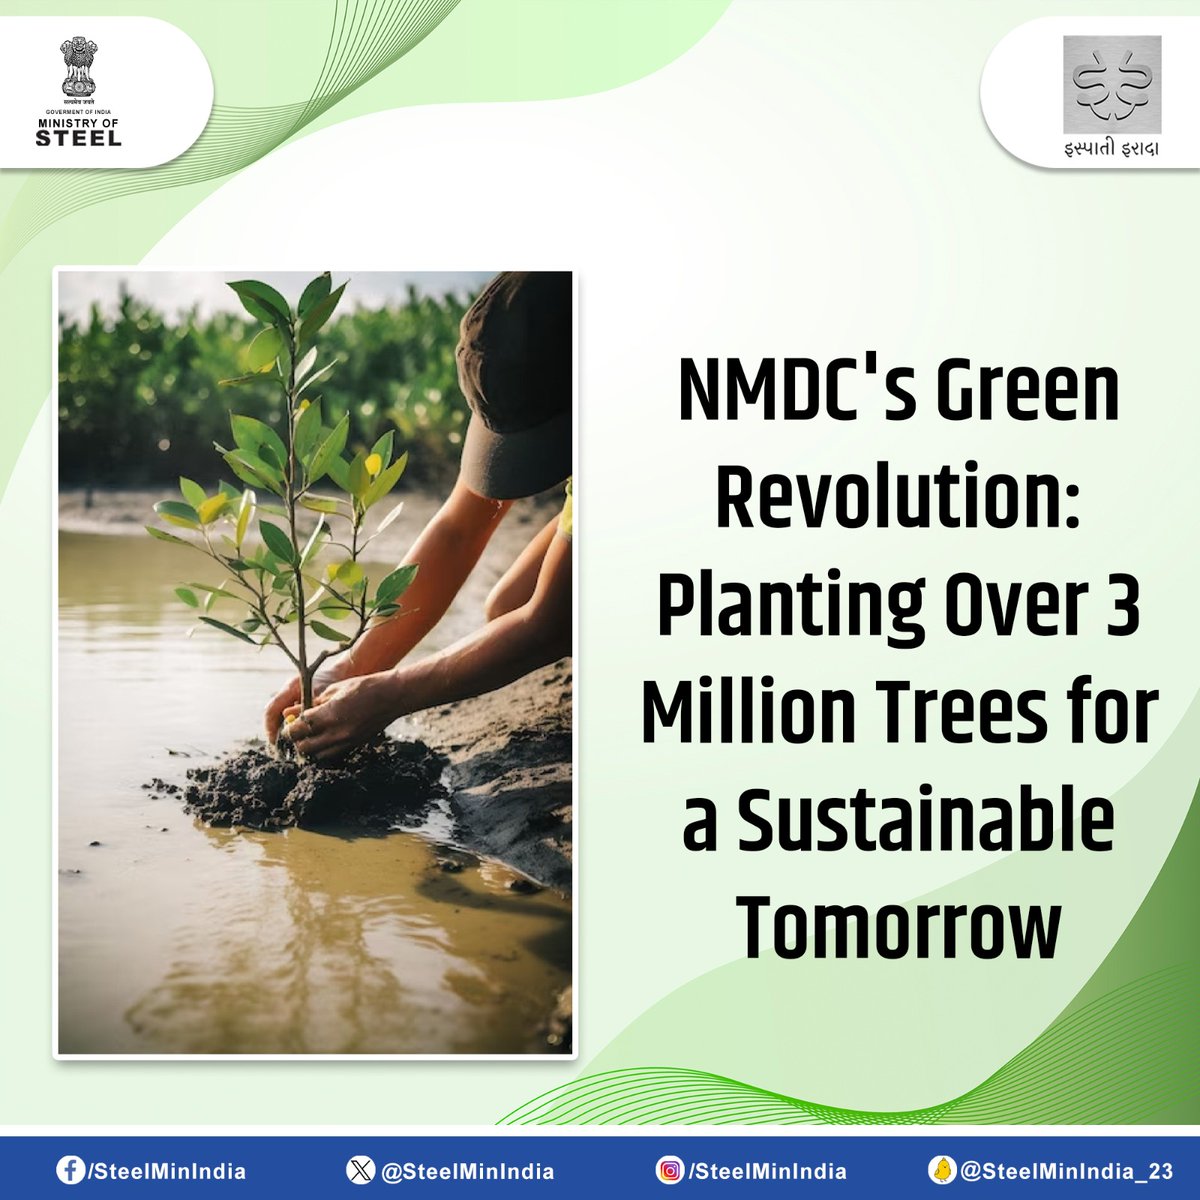 #NMDC is building a greener world by planting 3 million trees, creating a carbon sink, supporting biodiversity, and embracing sustainable practices. 🌿🌐

#CSR #GreenInitiatives #SustainabilityImpact #TreePlanting #NaturePreservation #CarbonSink